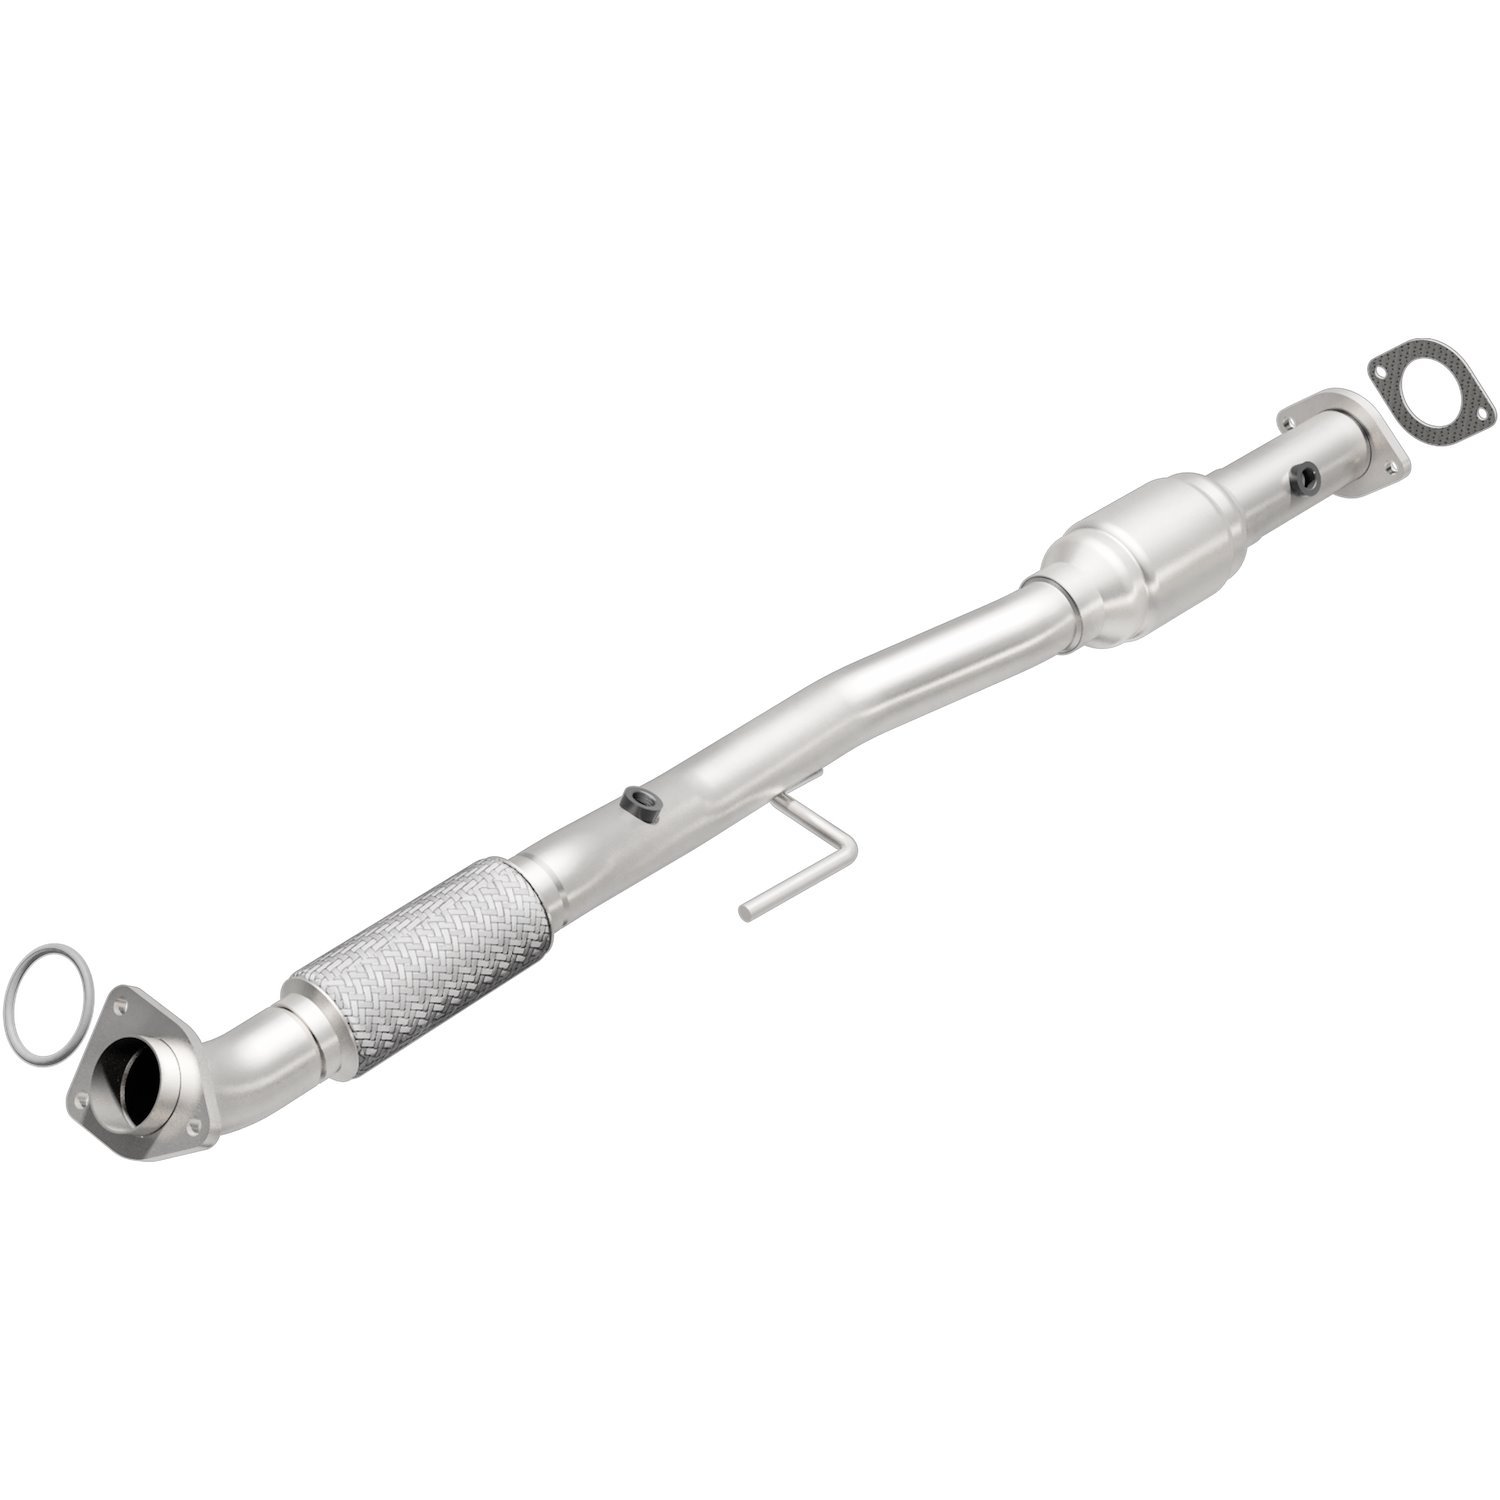 2007-2018 Nissan Altima OEM Grade Federal / EPA Compliant Direct-Fit Catalytic Converter